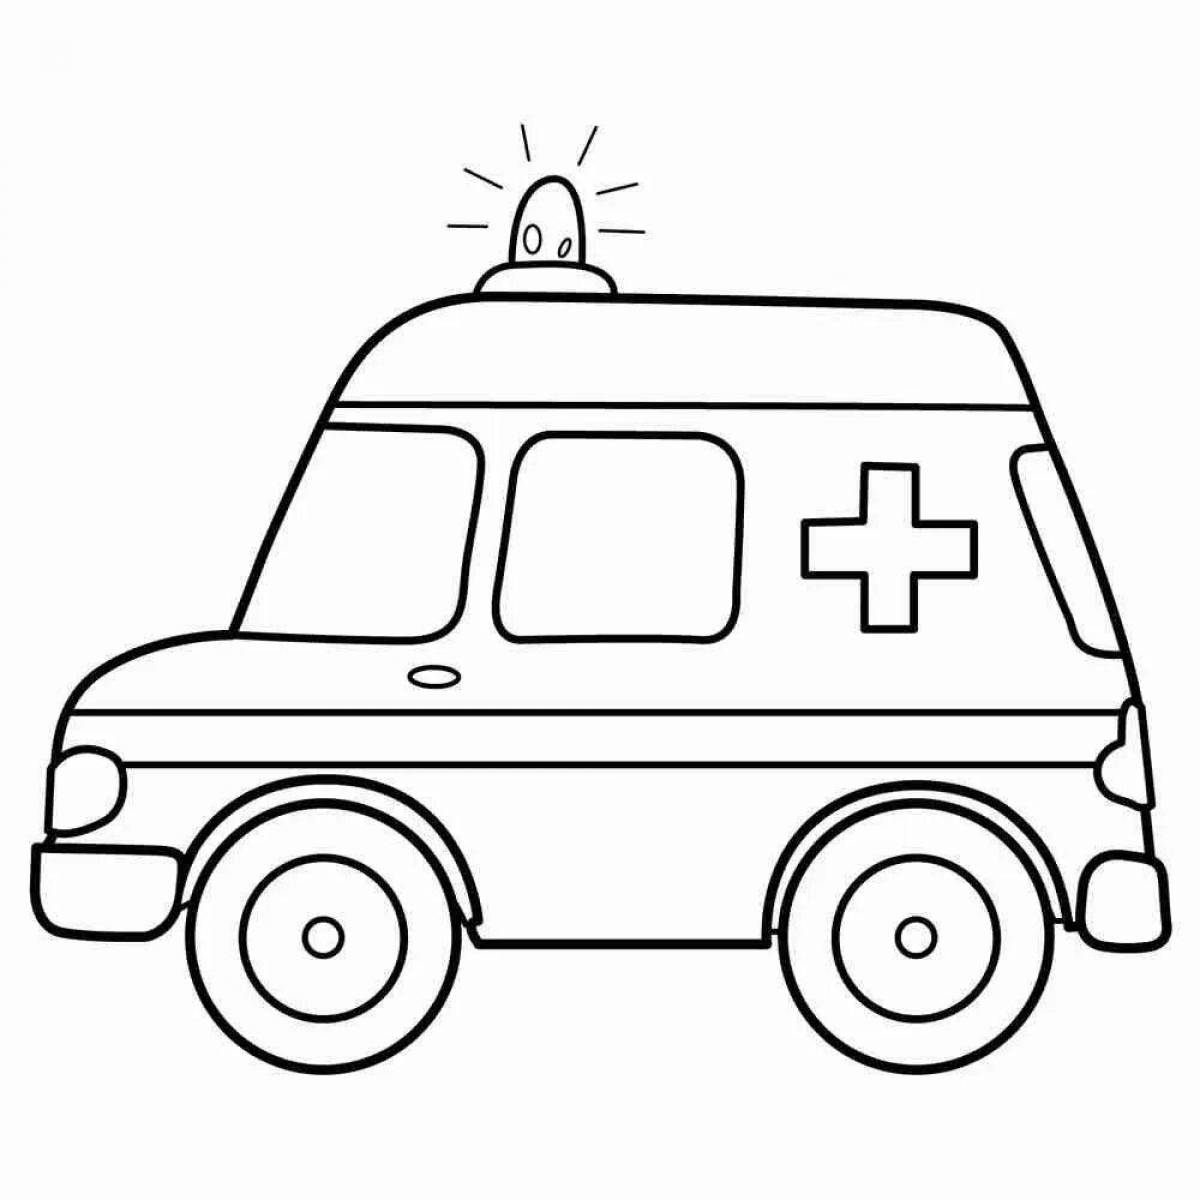 Awesome special purpose vehicle coloring page